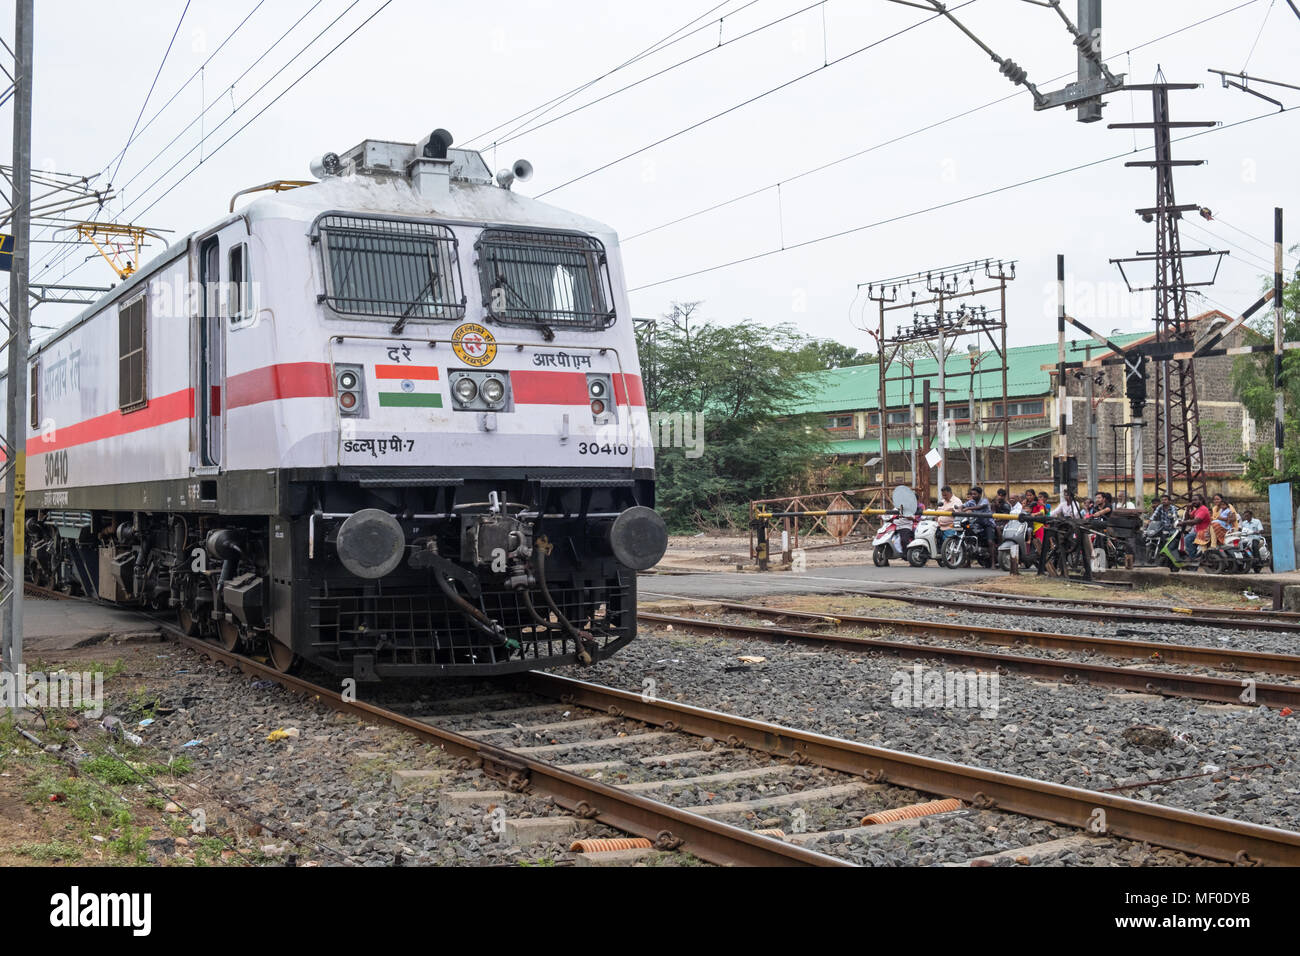 Pondicherry, India - March 17, 2018: A locomotive at the front of a passenger train passing over a level crossing outside the main station Stock Photo